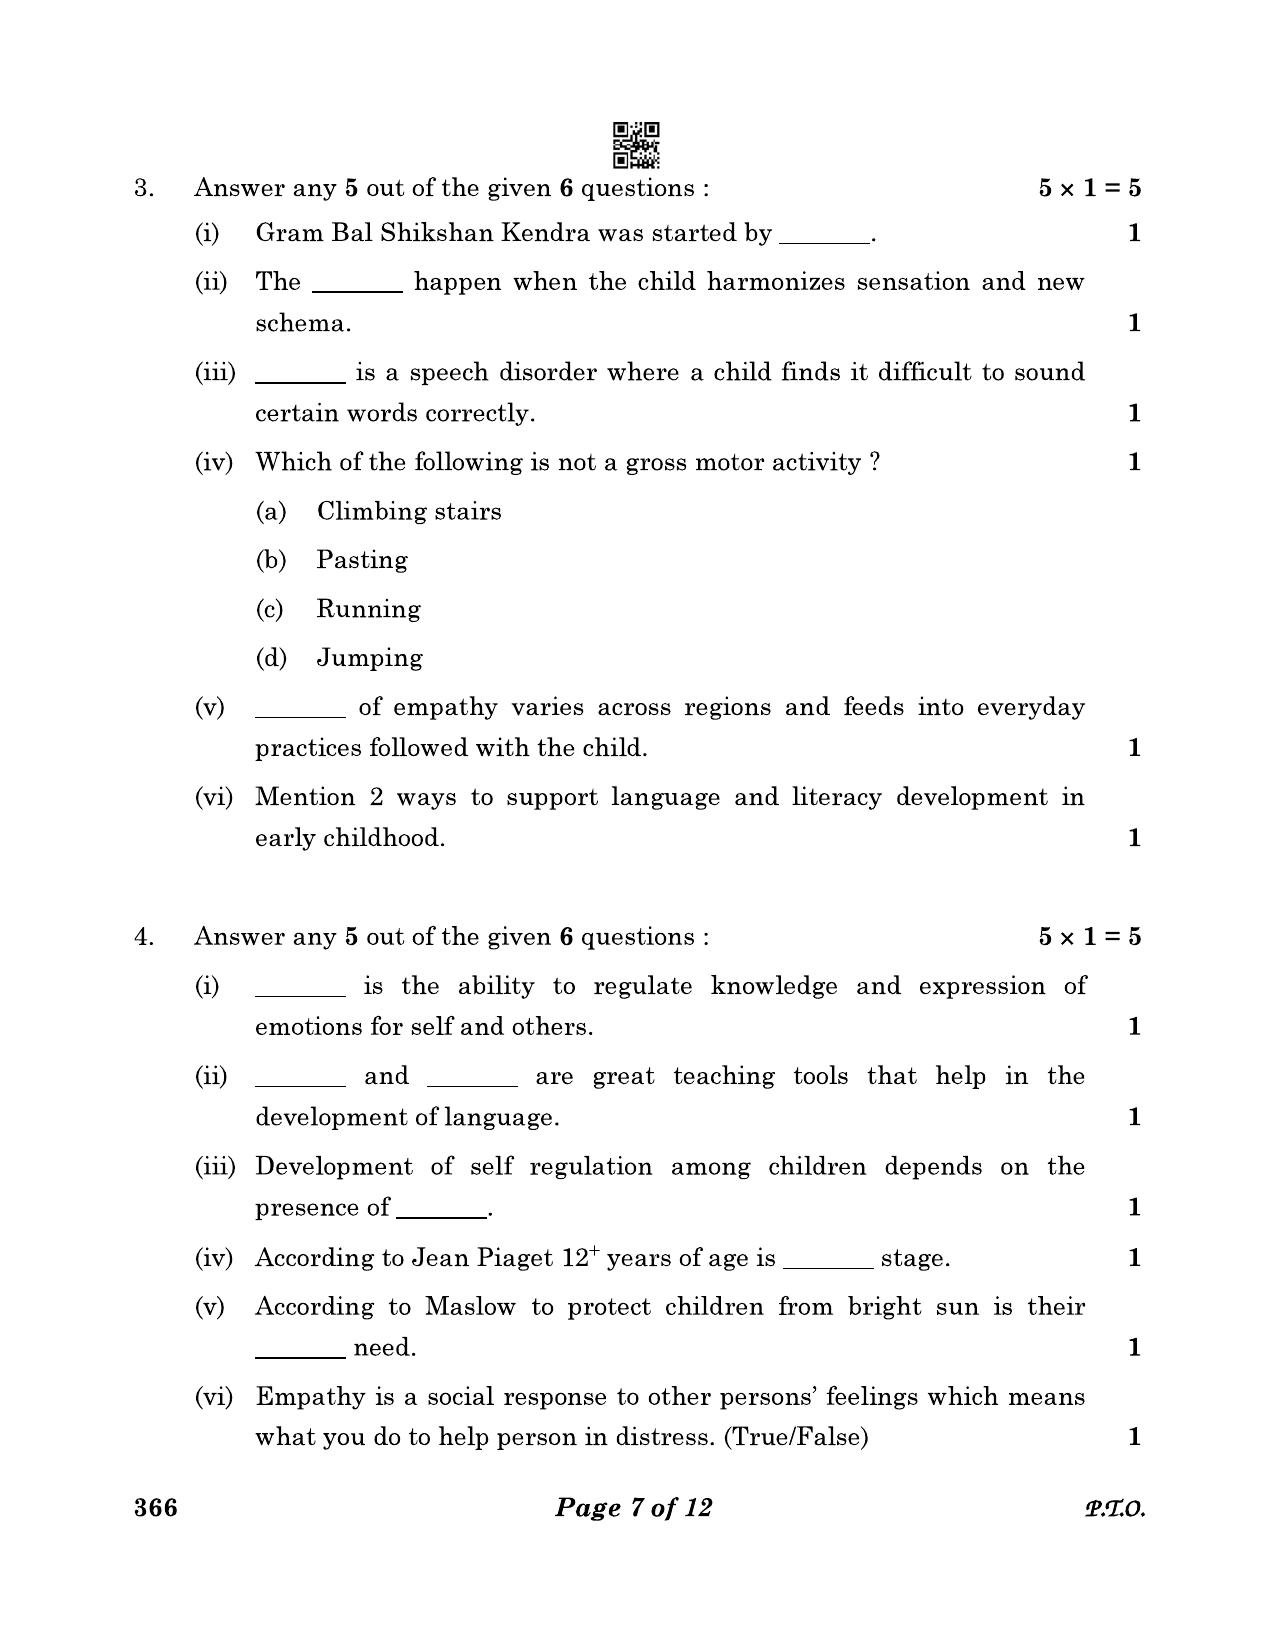 CBSE Class 12 366_Early Childhood Care & Education 2023 Question Paper - Page 7